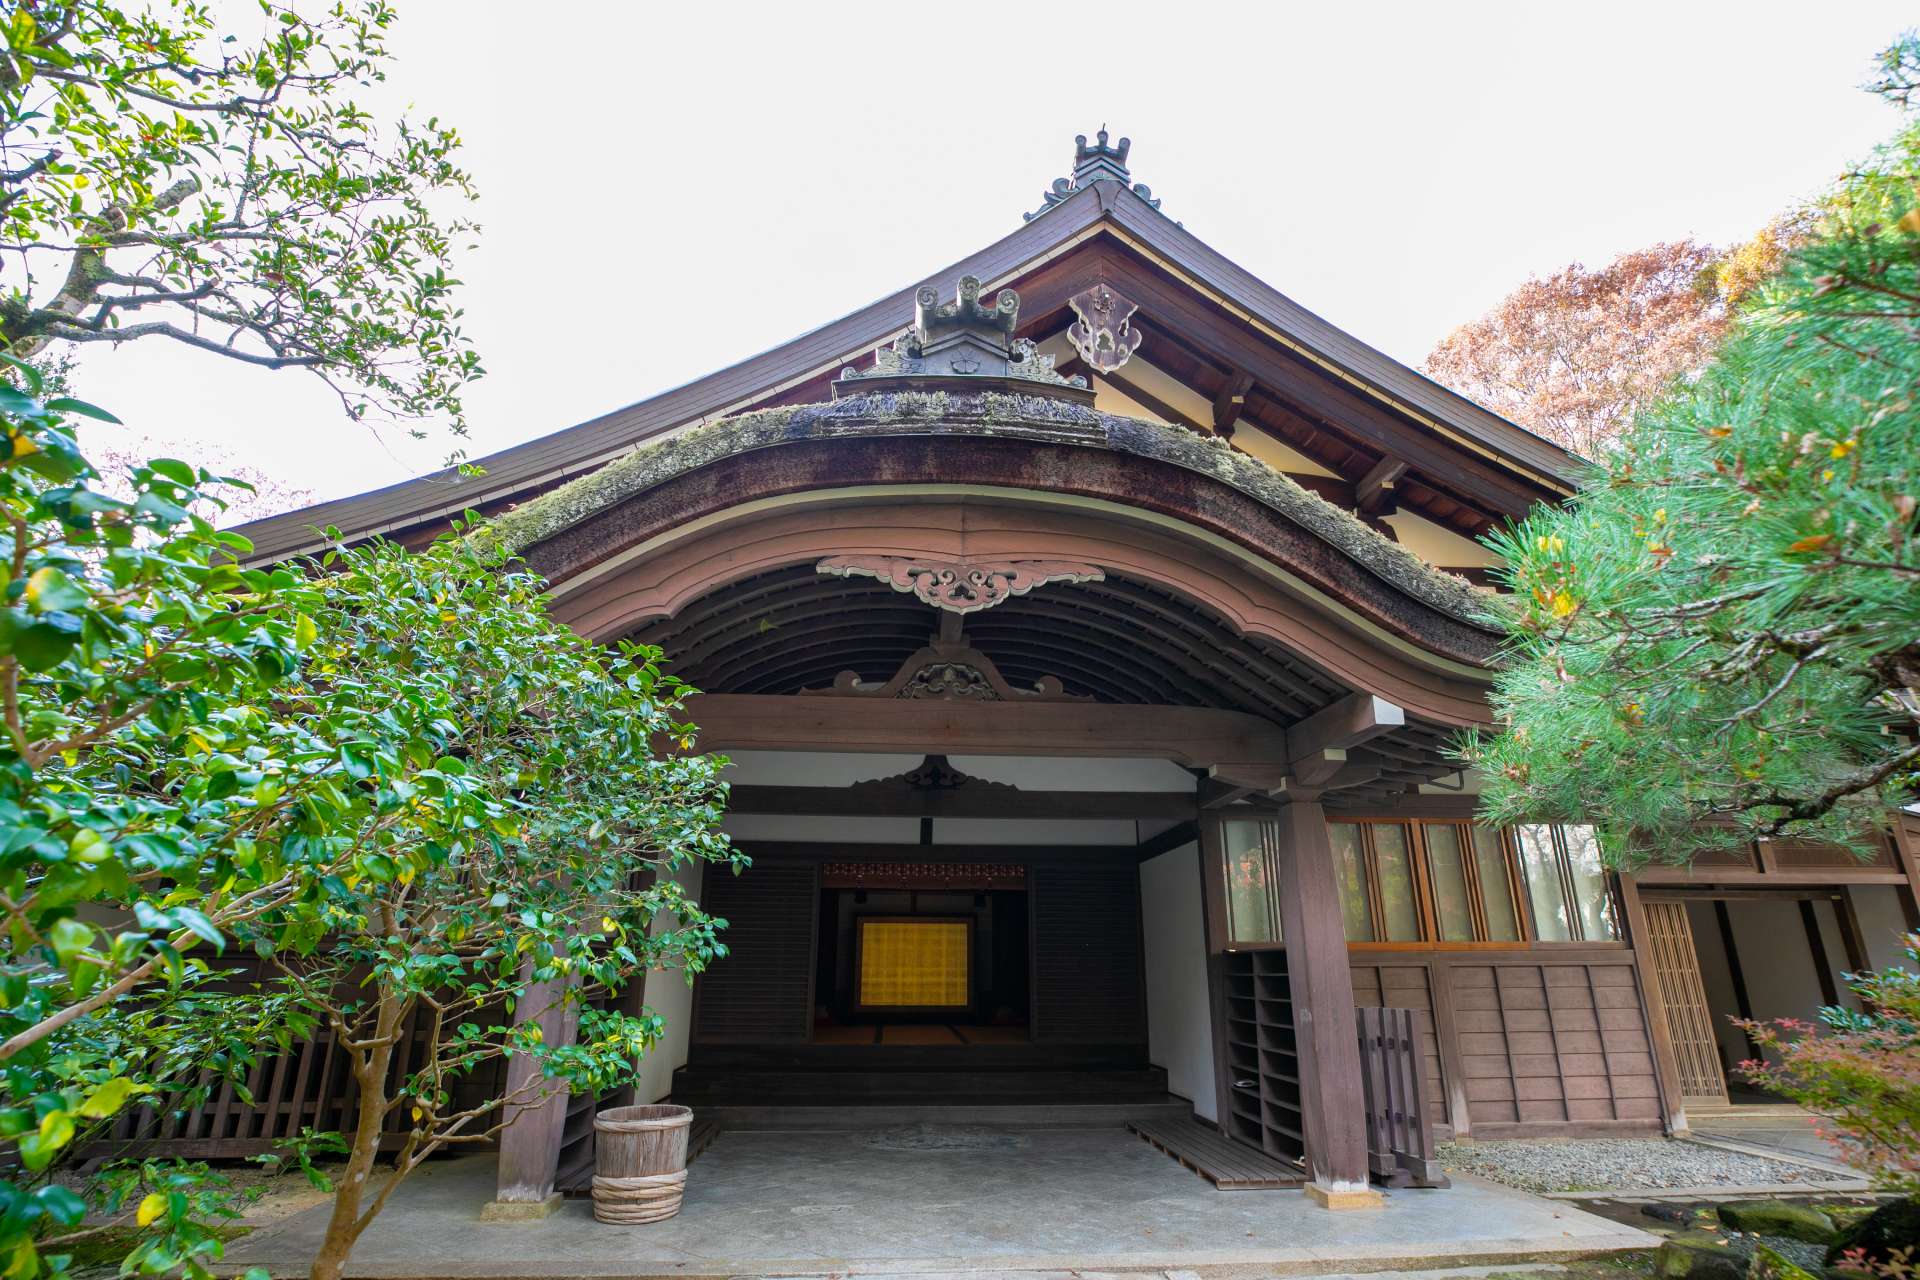 The Honbo, known as Chisenkaku, is located to the north of Zaodo. It features a magnificent gabled roof.